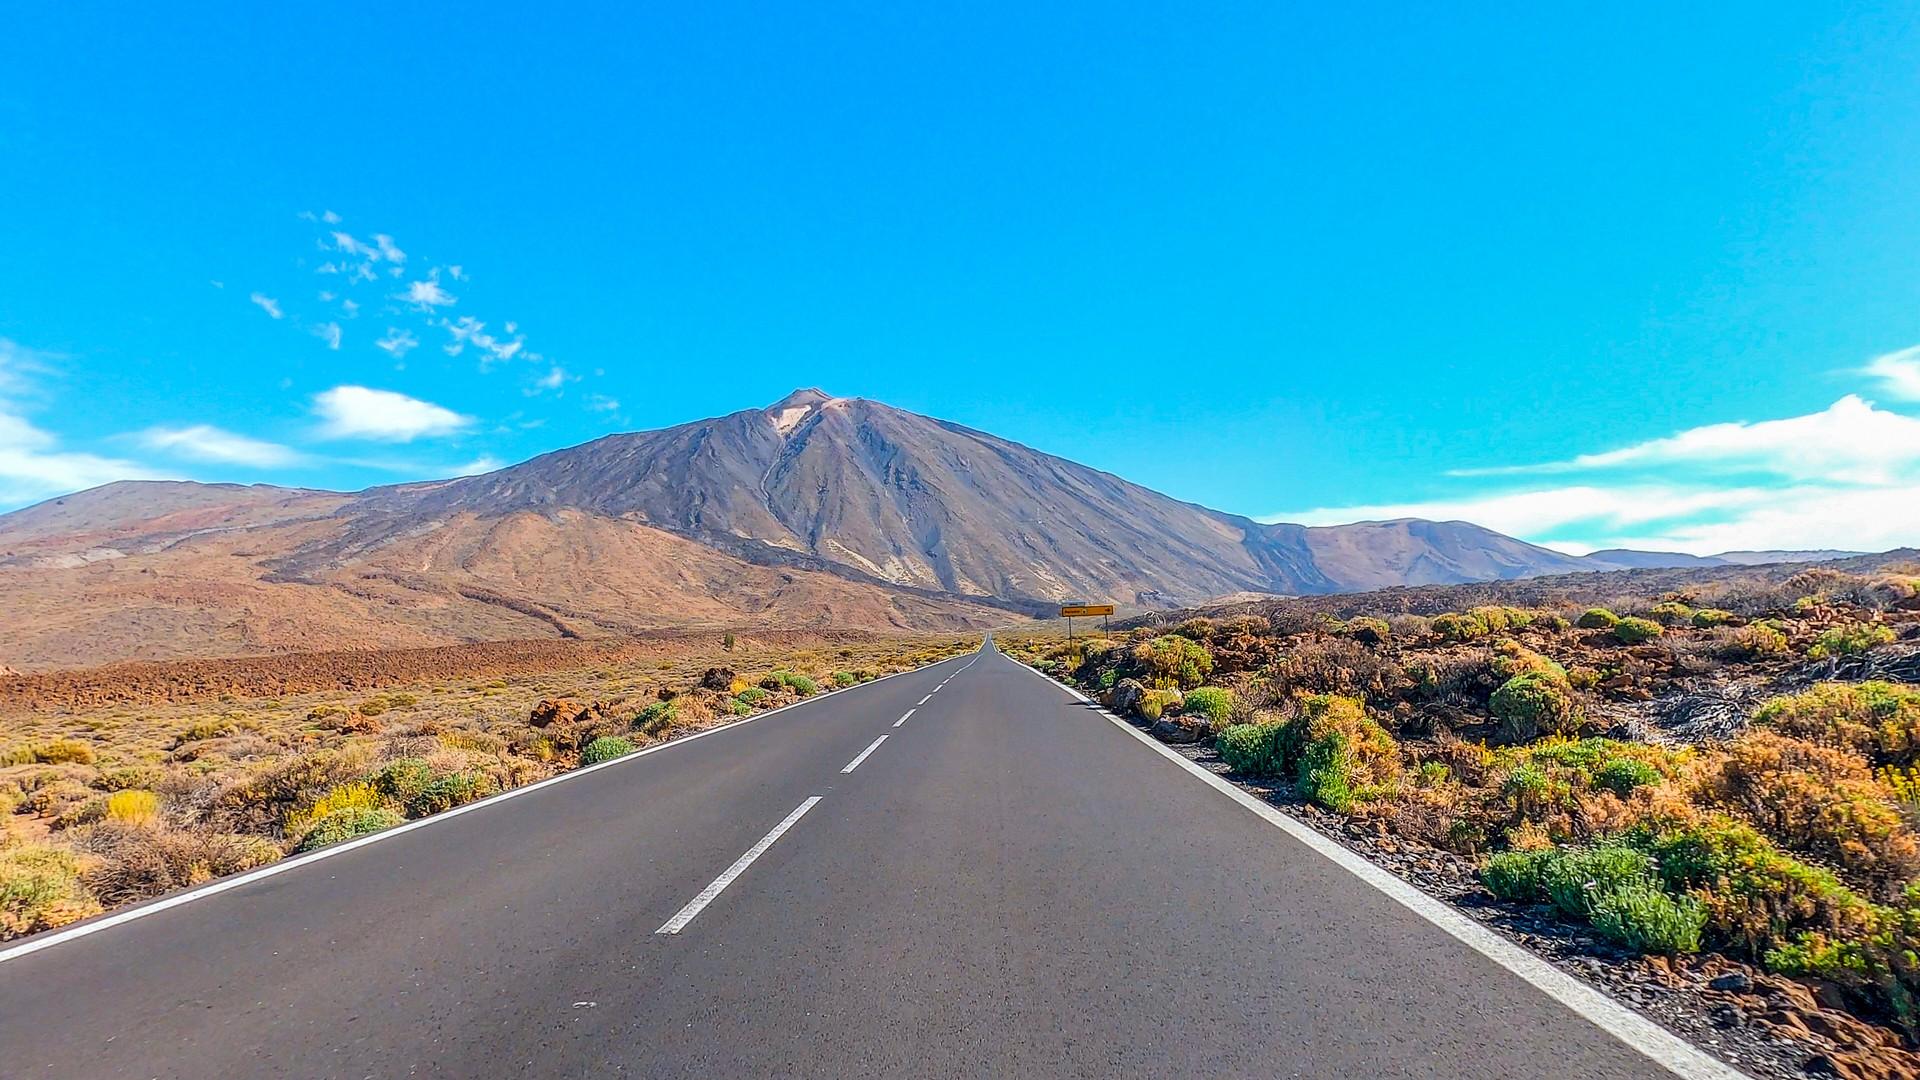 Tenerife: road with a view of the mountain.